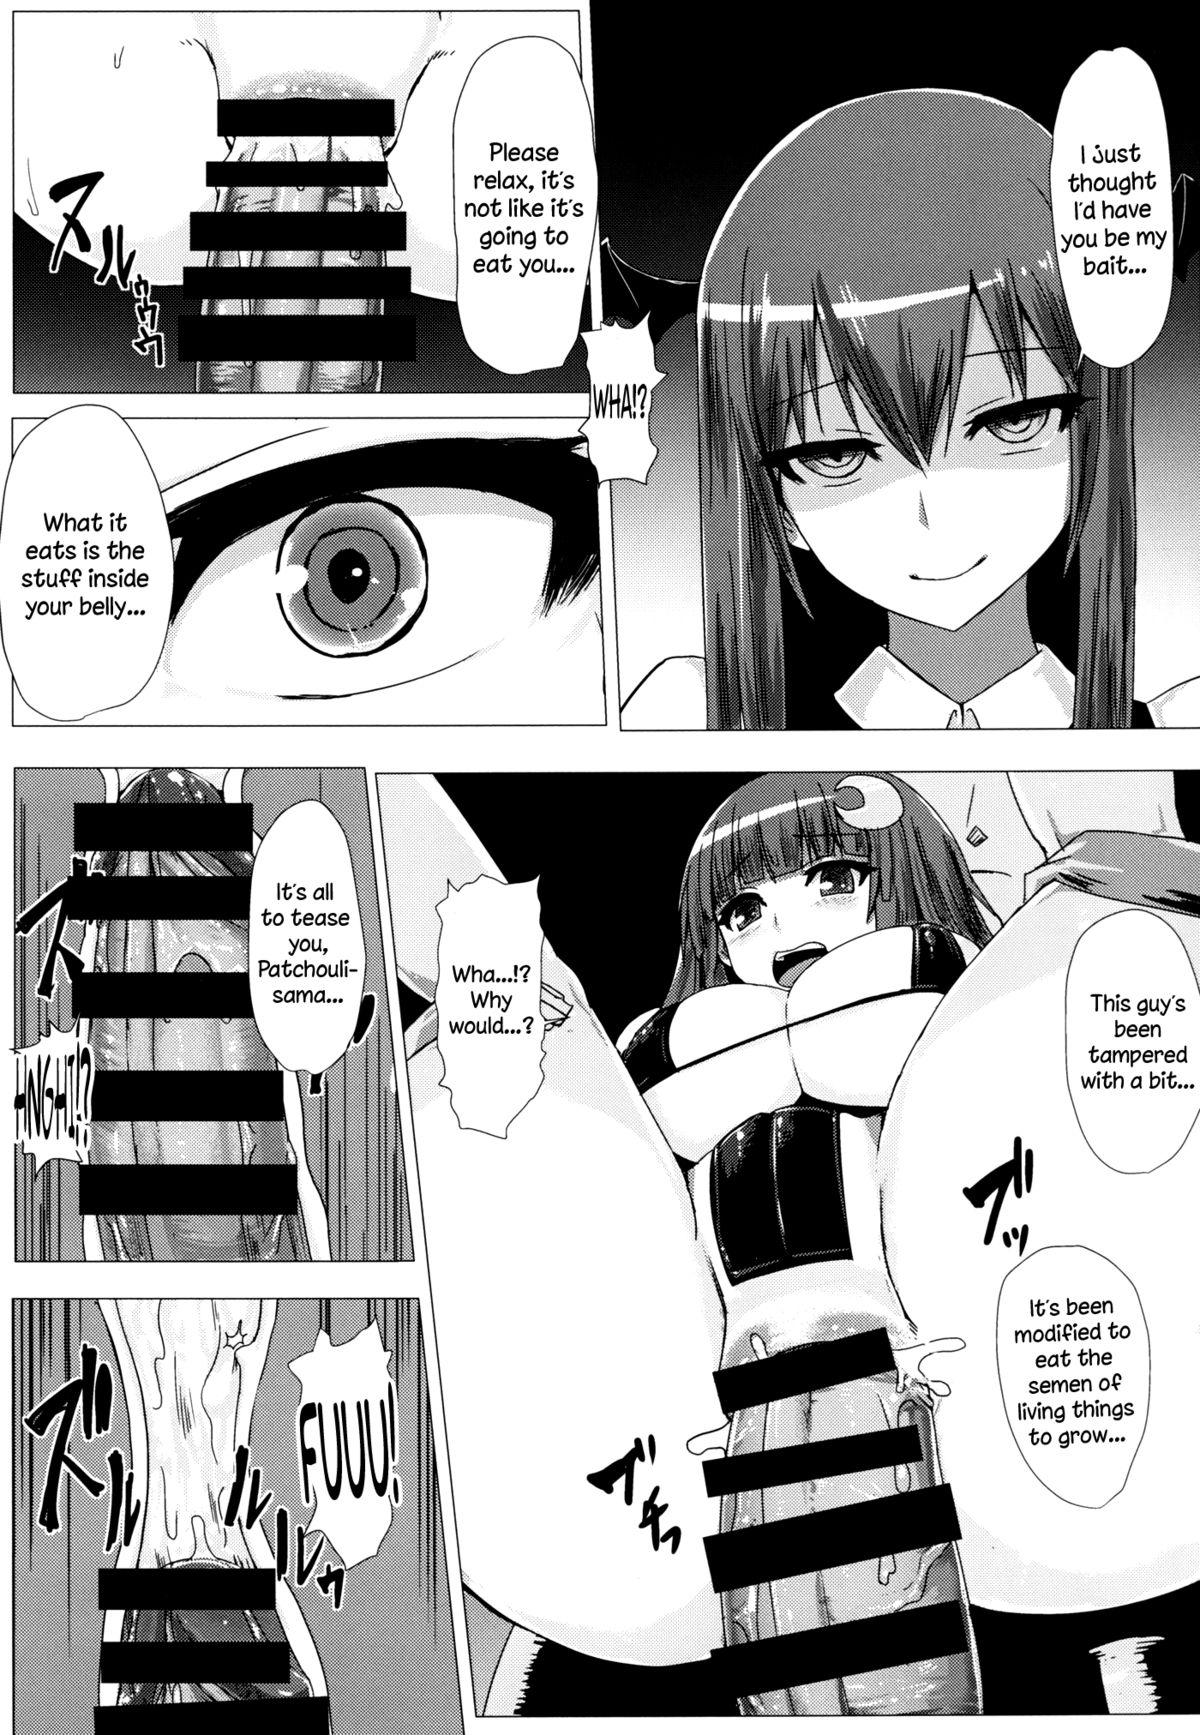 Whooty Shiri Pache Pache | Ass Patchy Patchy - Touhou project Bangladeshi - Page 10